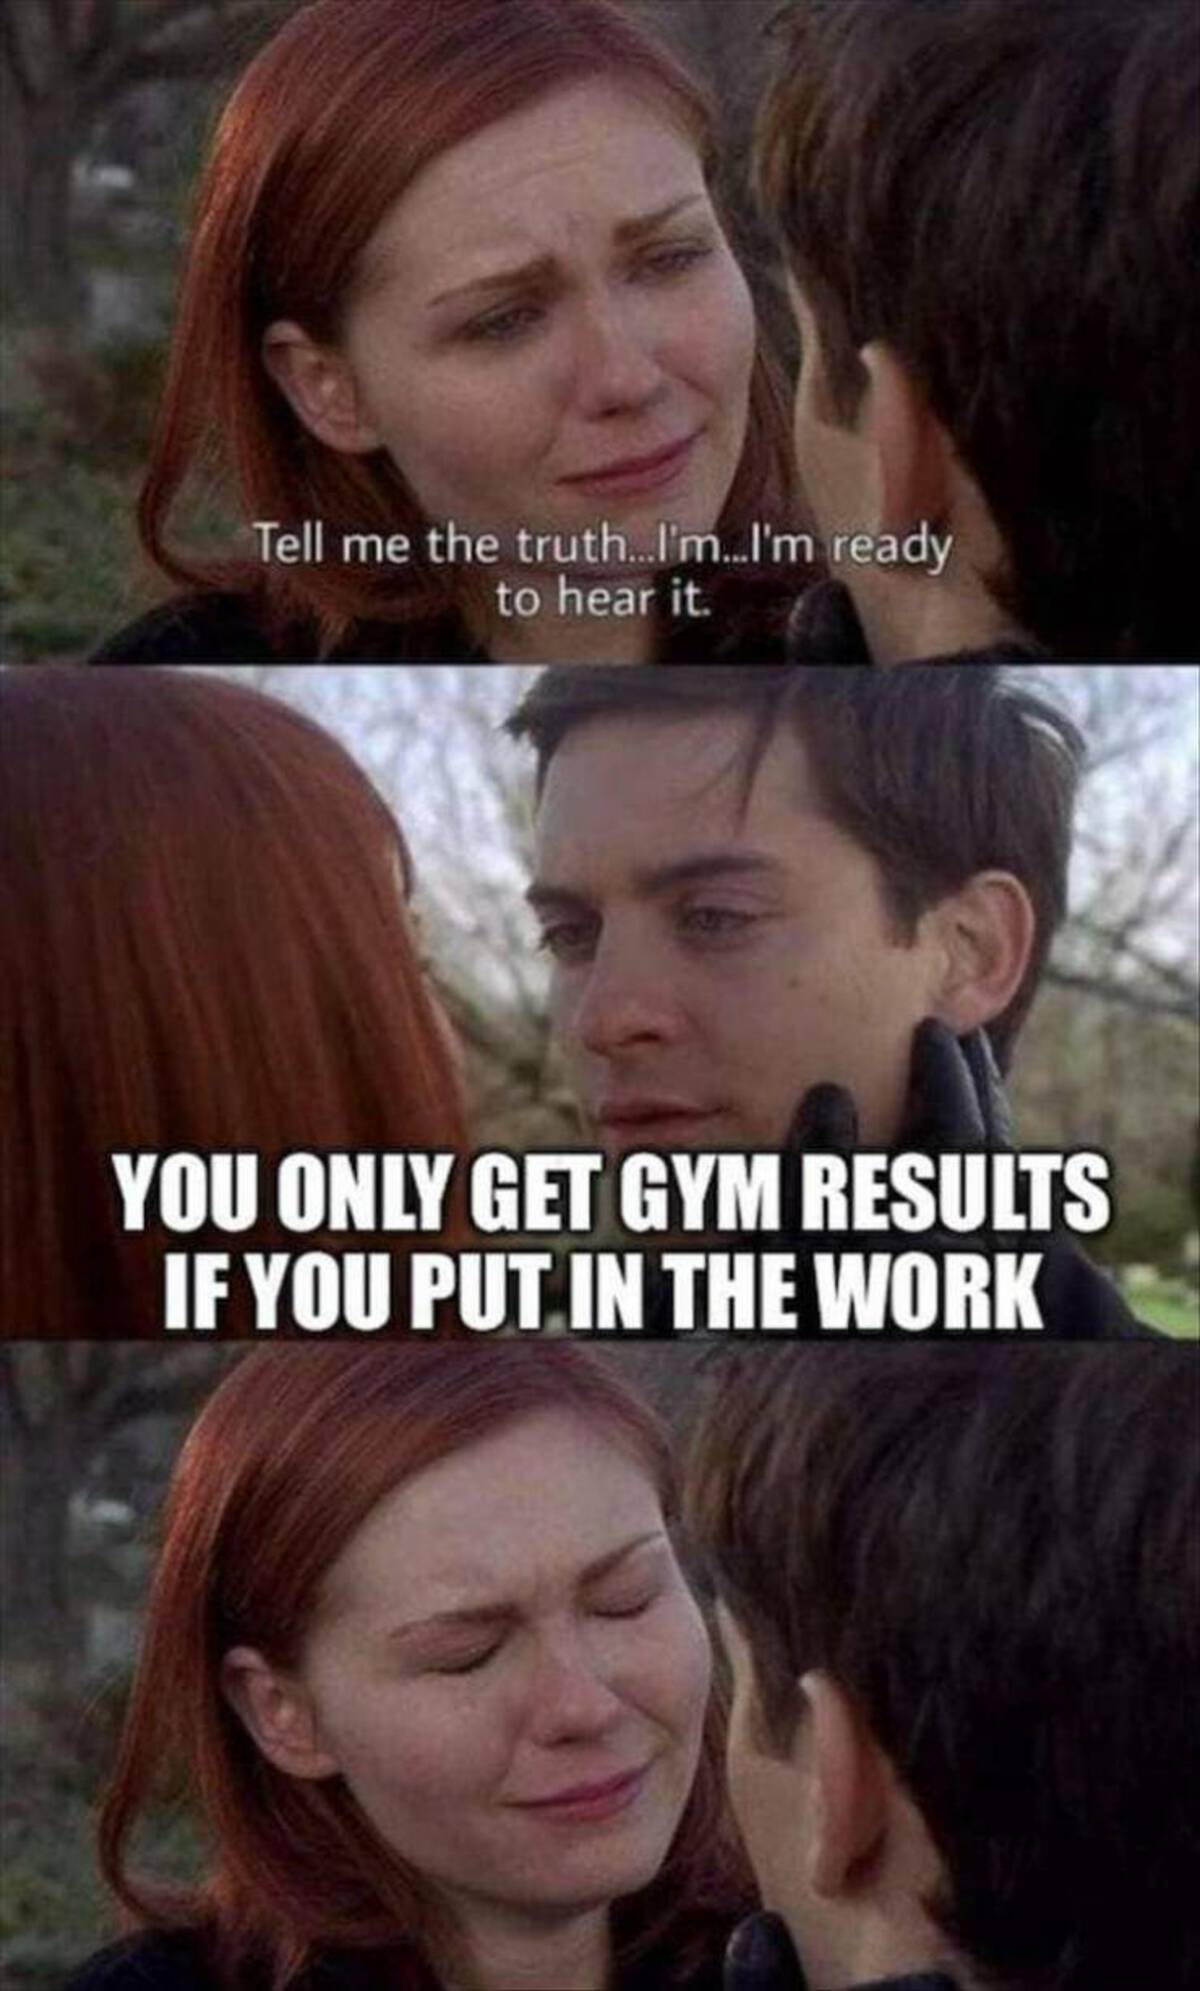 asset inventory meme - Tell me the truth...I'm...I'm ready to hear it. You Only Get Gym Results If You Put In The Work